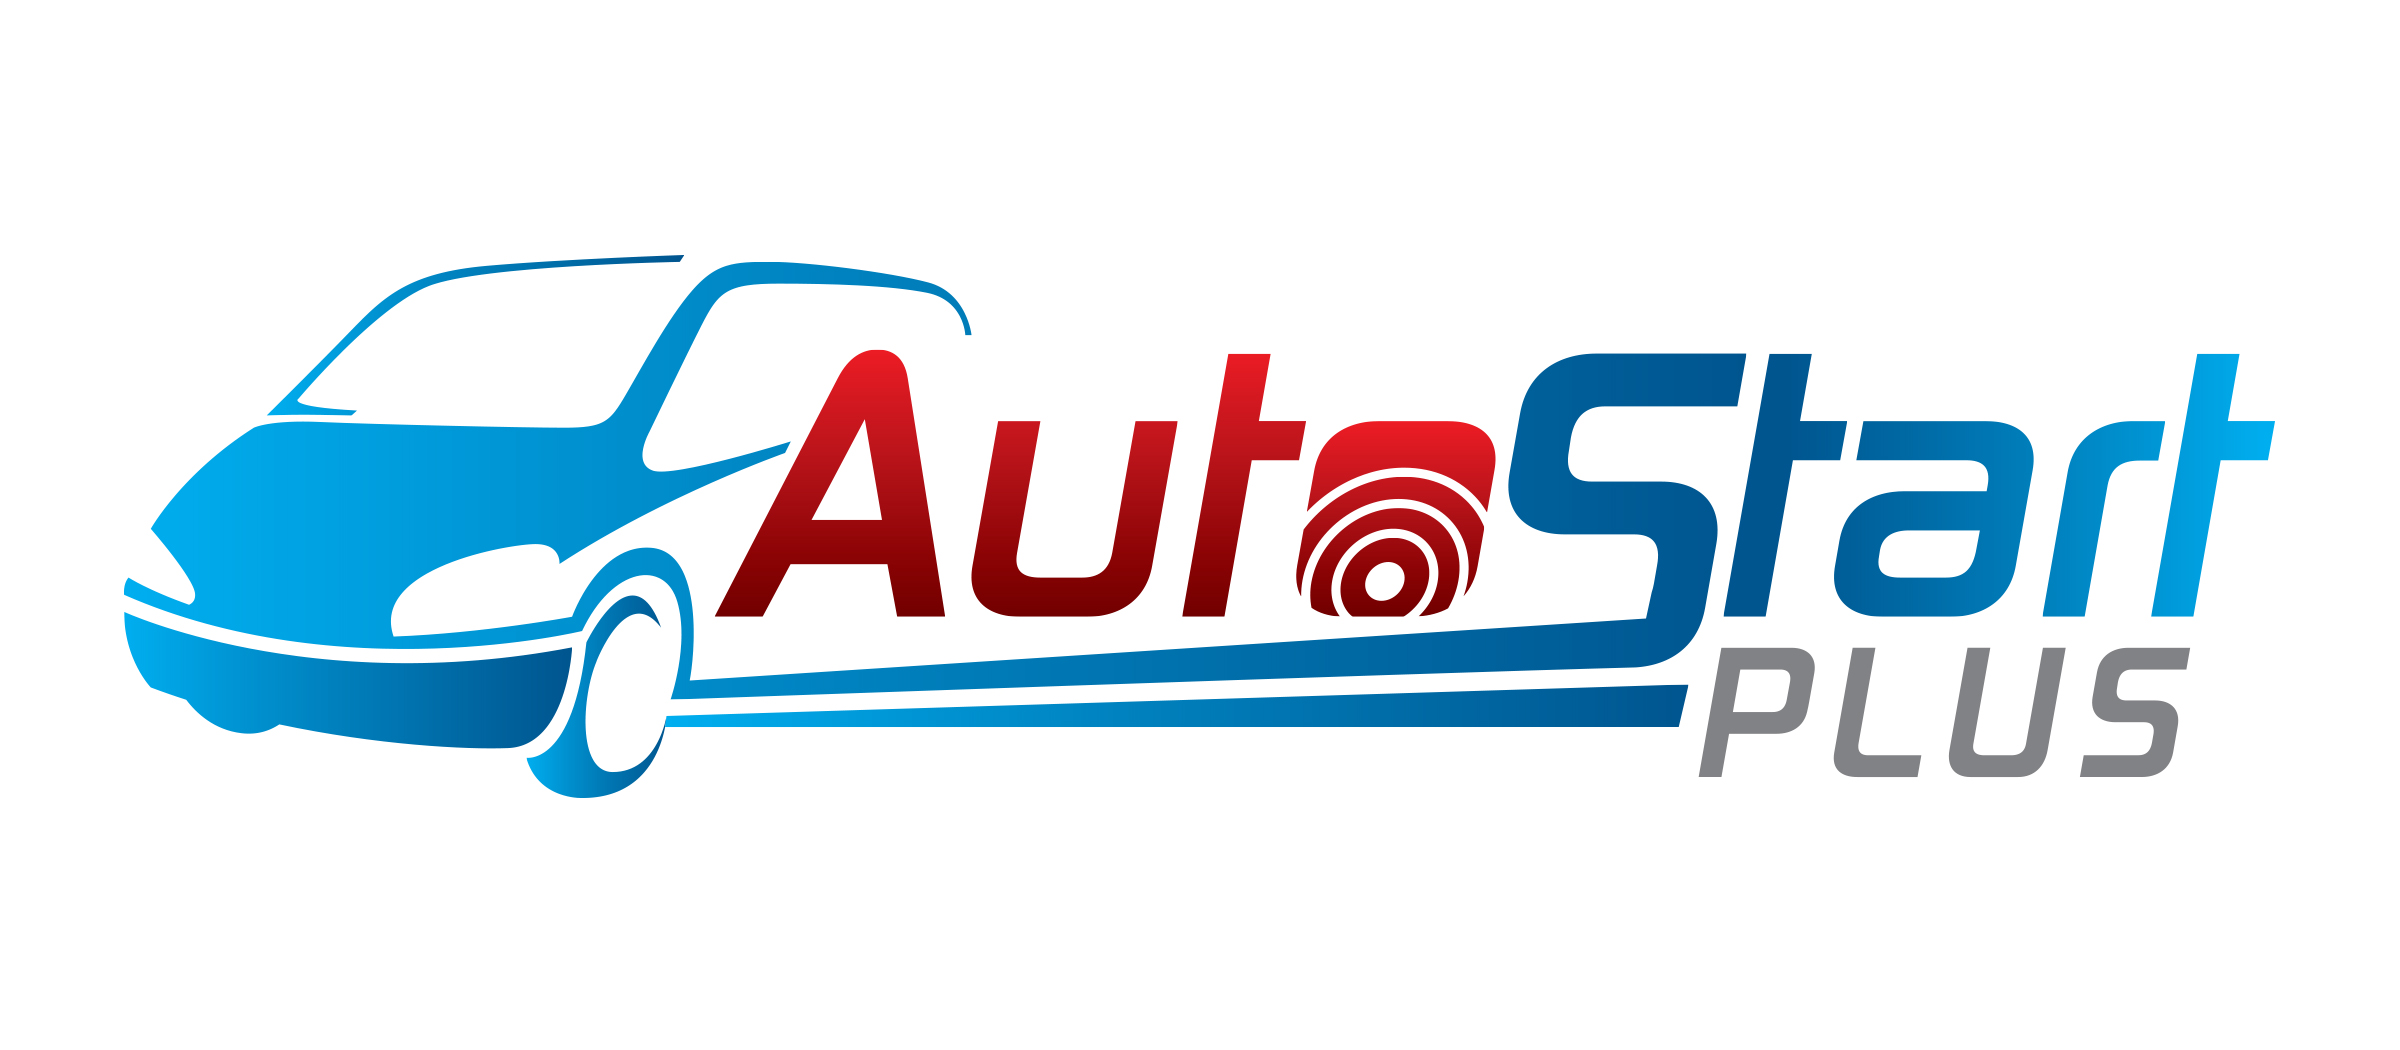 Auto Start Plus will afford people many conveniences that help them in their day to day lives.